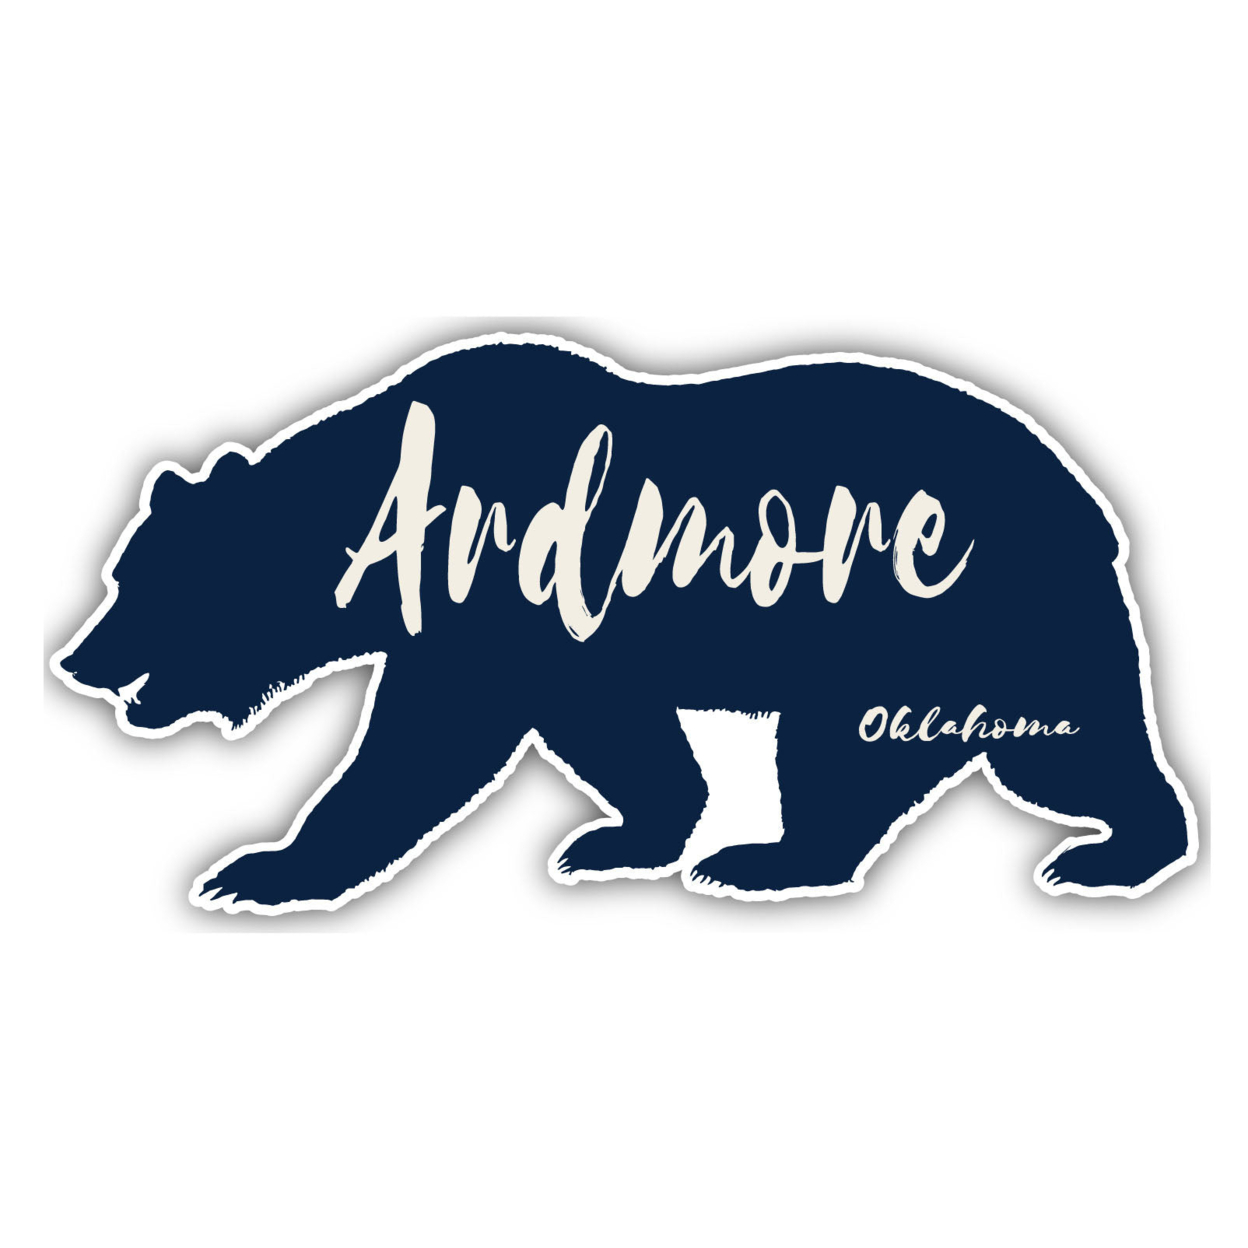 Ardmore Oklahoma Souvenir Decorative Stickers (Choose Theme And Size) - 4-Pack, 12-Inch, Tent